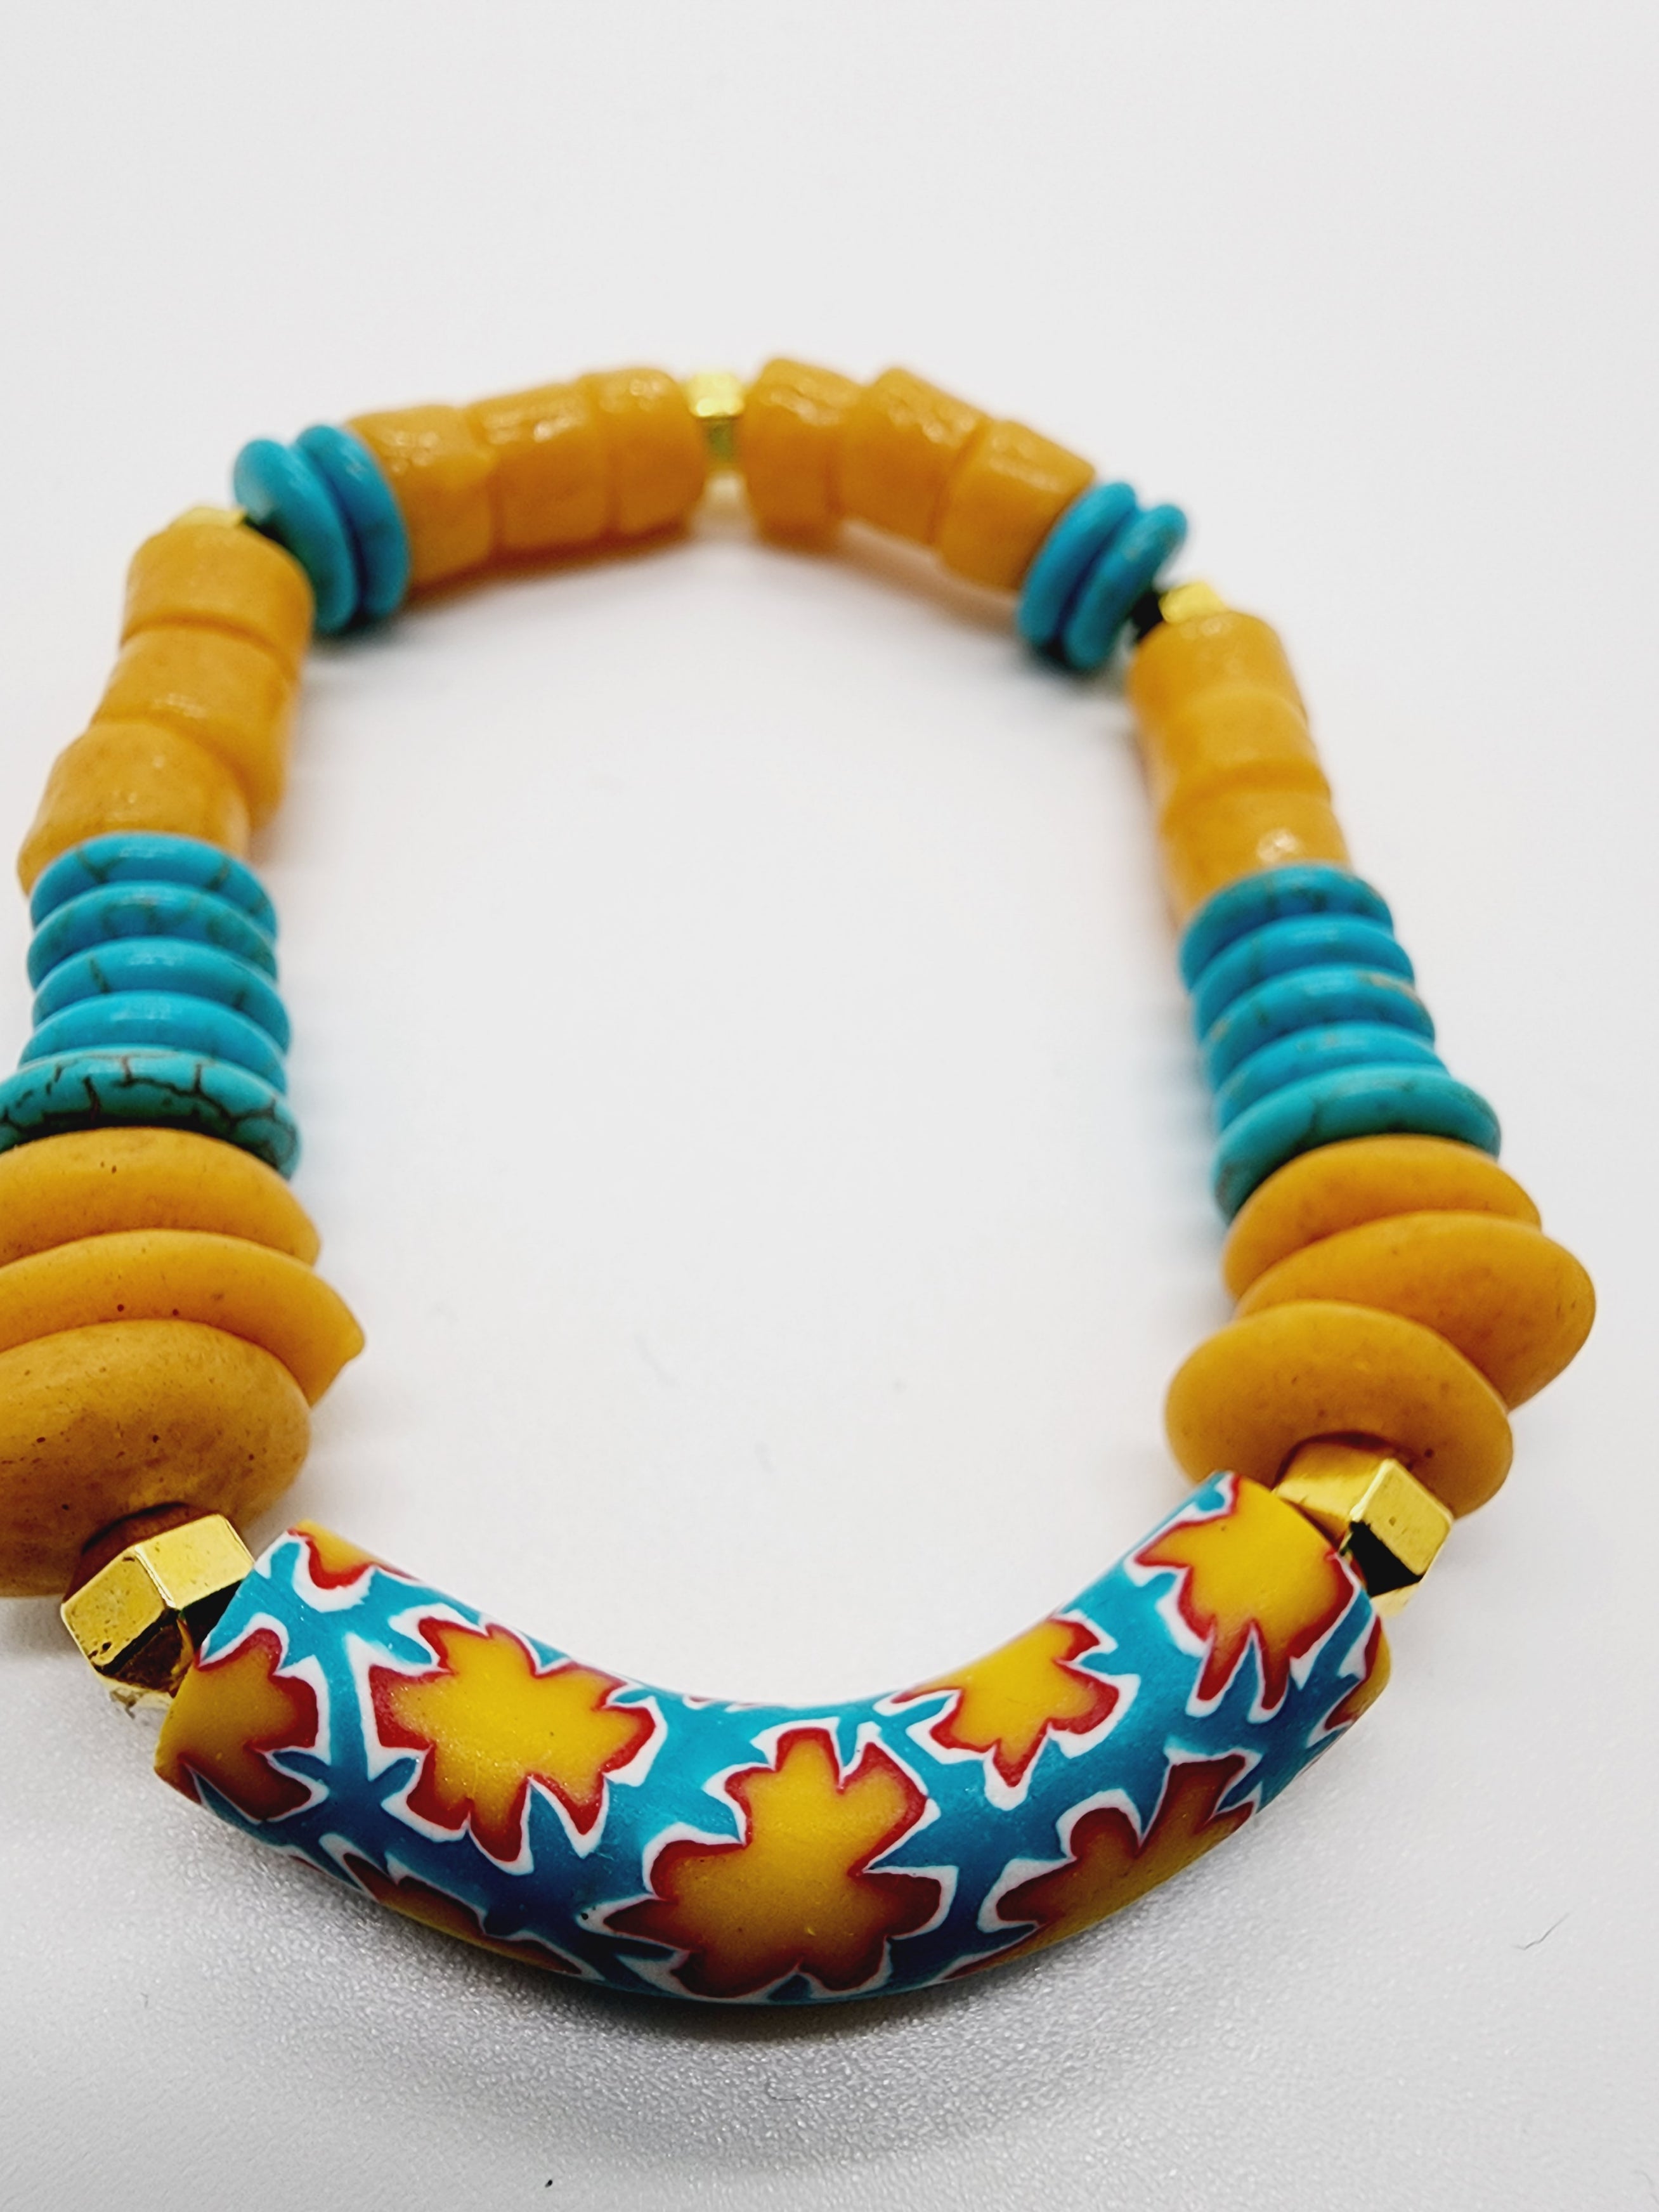 Length: 7.75 inches | Weight: 1.1 ounces  Distinctly You! This bracelet is handmade using gold Kente beads, turquoise resin spacers, gold spacer beads, and bracelet uses 8mm latex free clear stretch cord. 